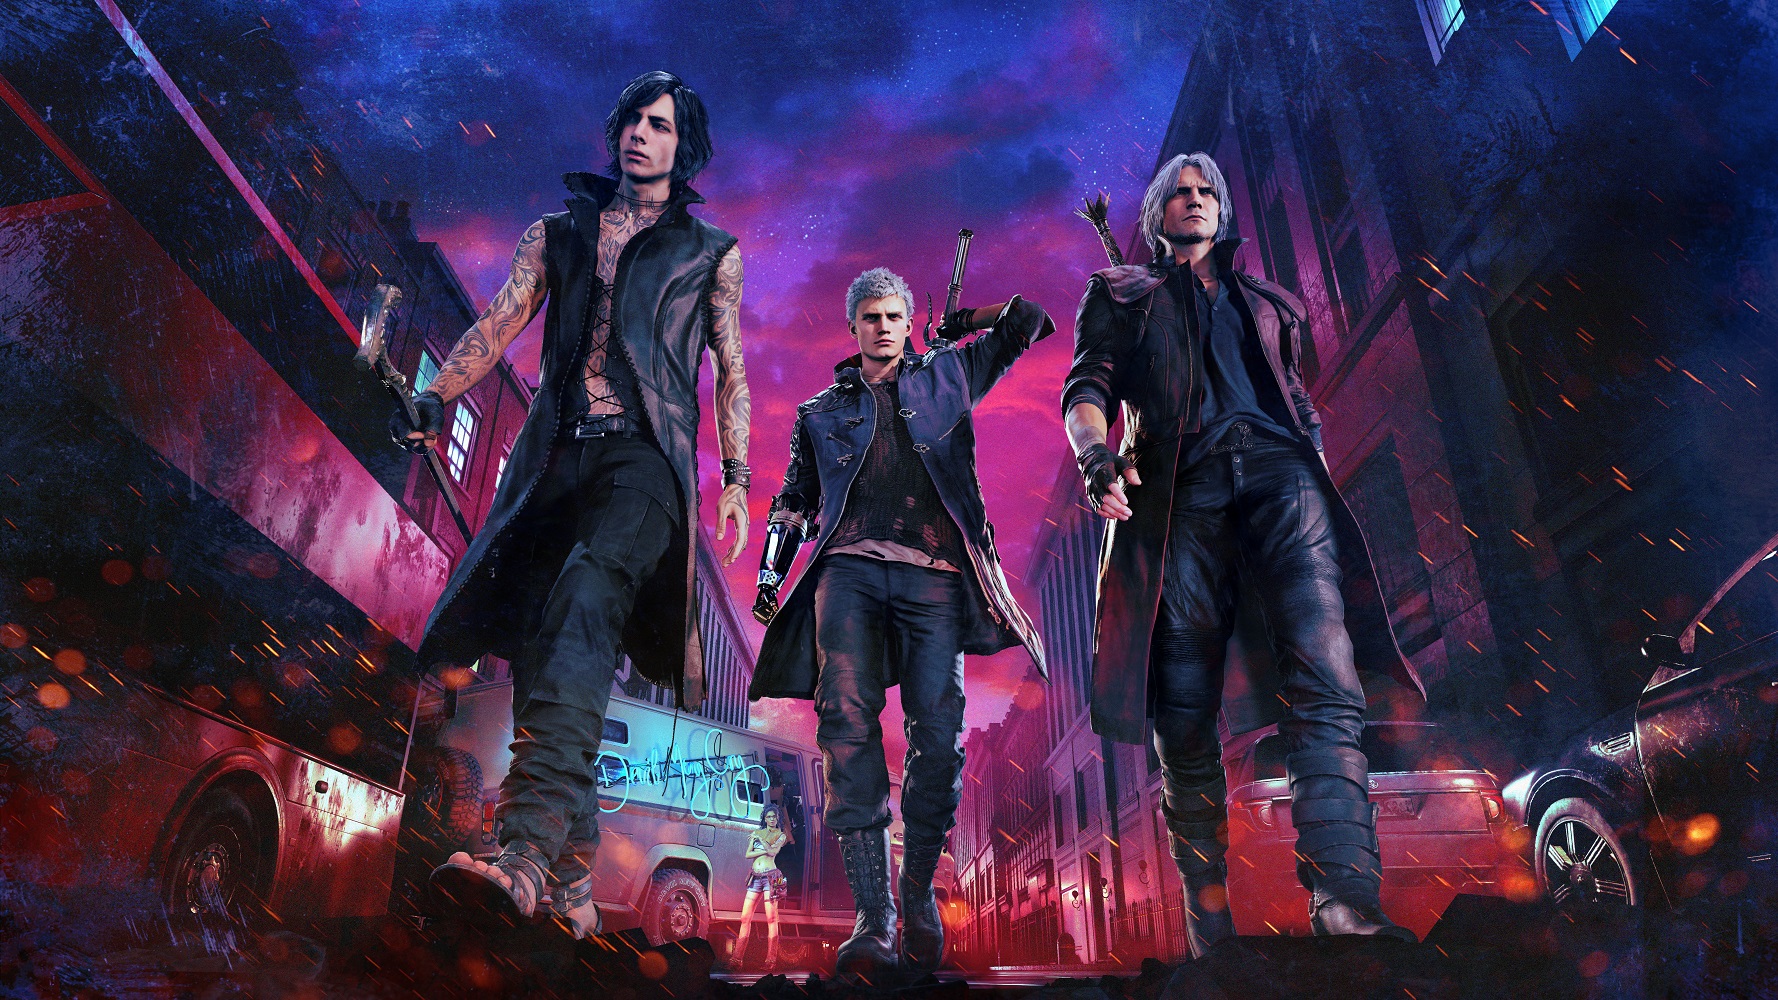 Devil May Cry Image Dmc5 Deluxe Edition HD Wallpaper And